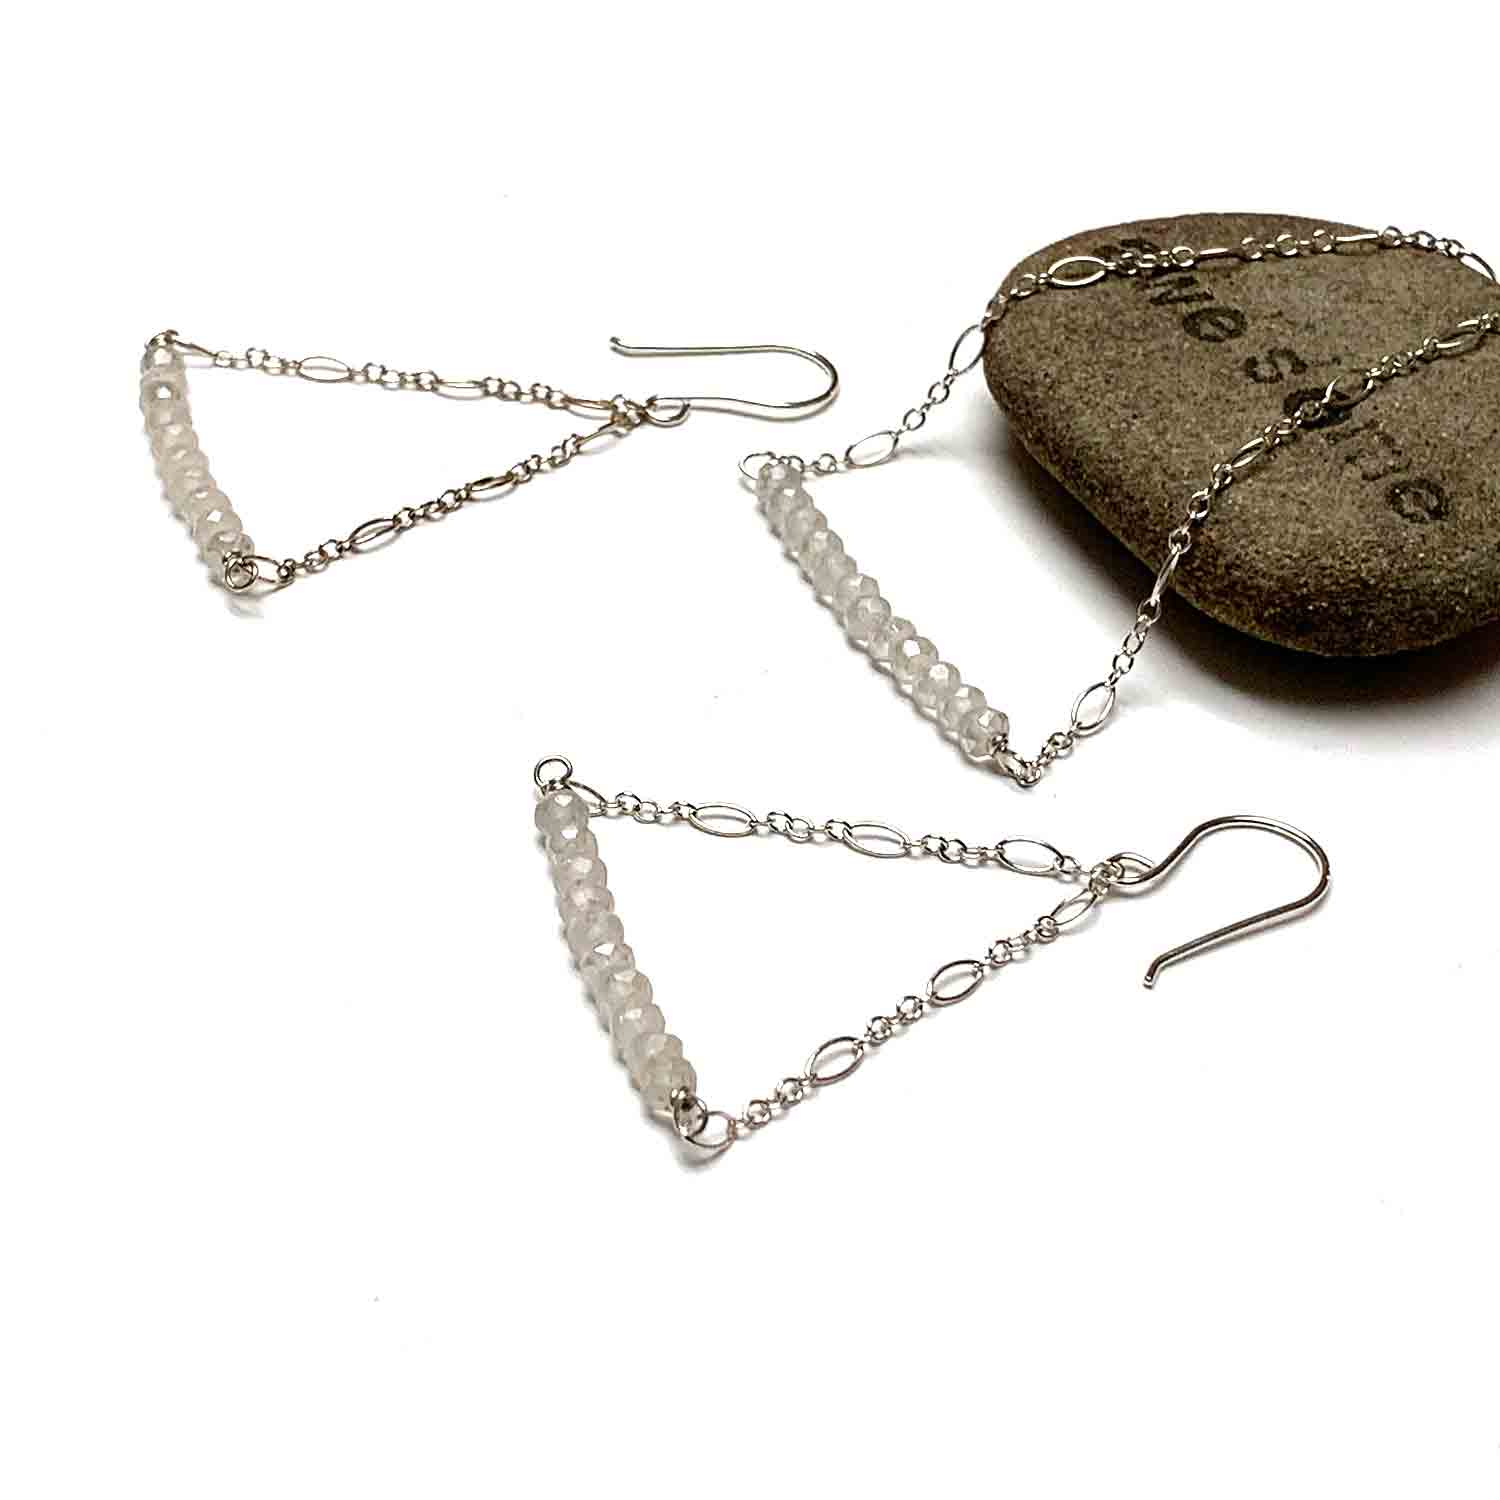 STERLING SILVER GEMSTONE BAR AND CHAIN EARRINGS - VARIOUS TALISMANS